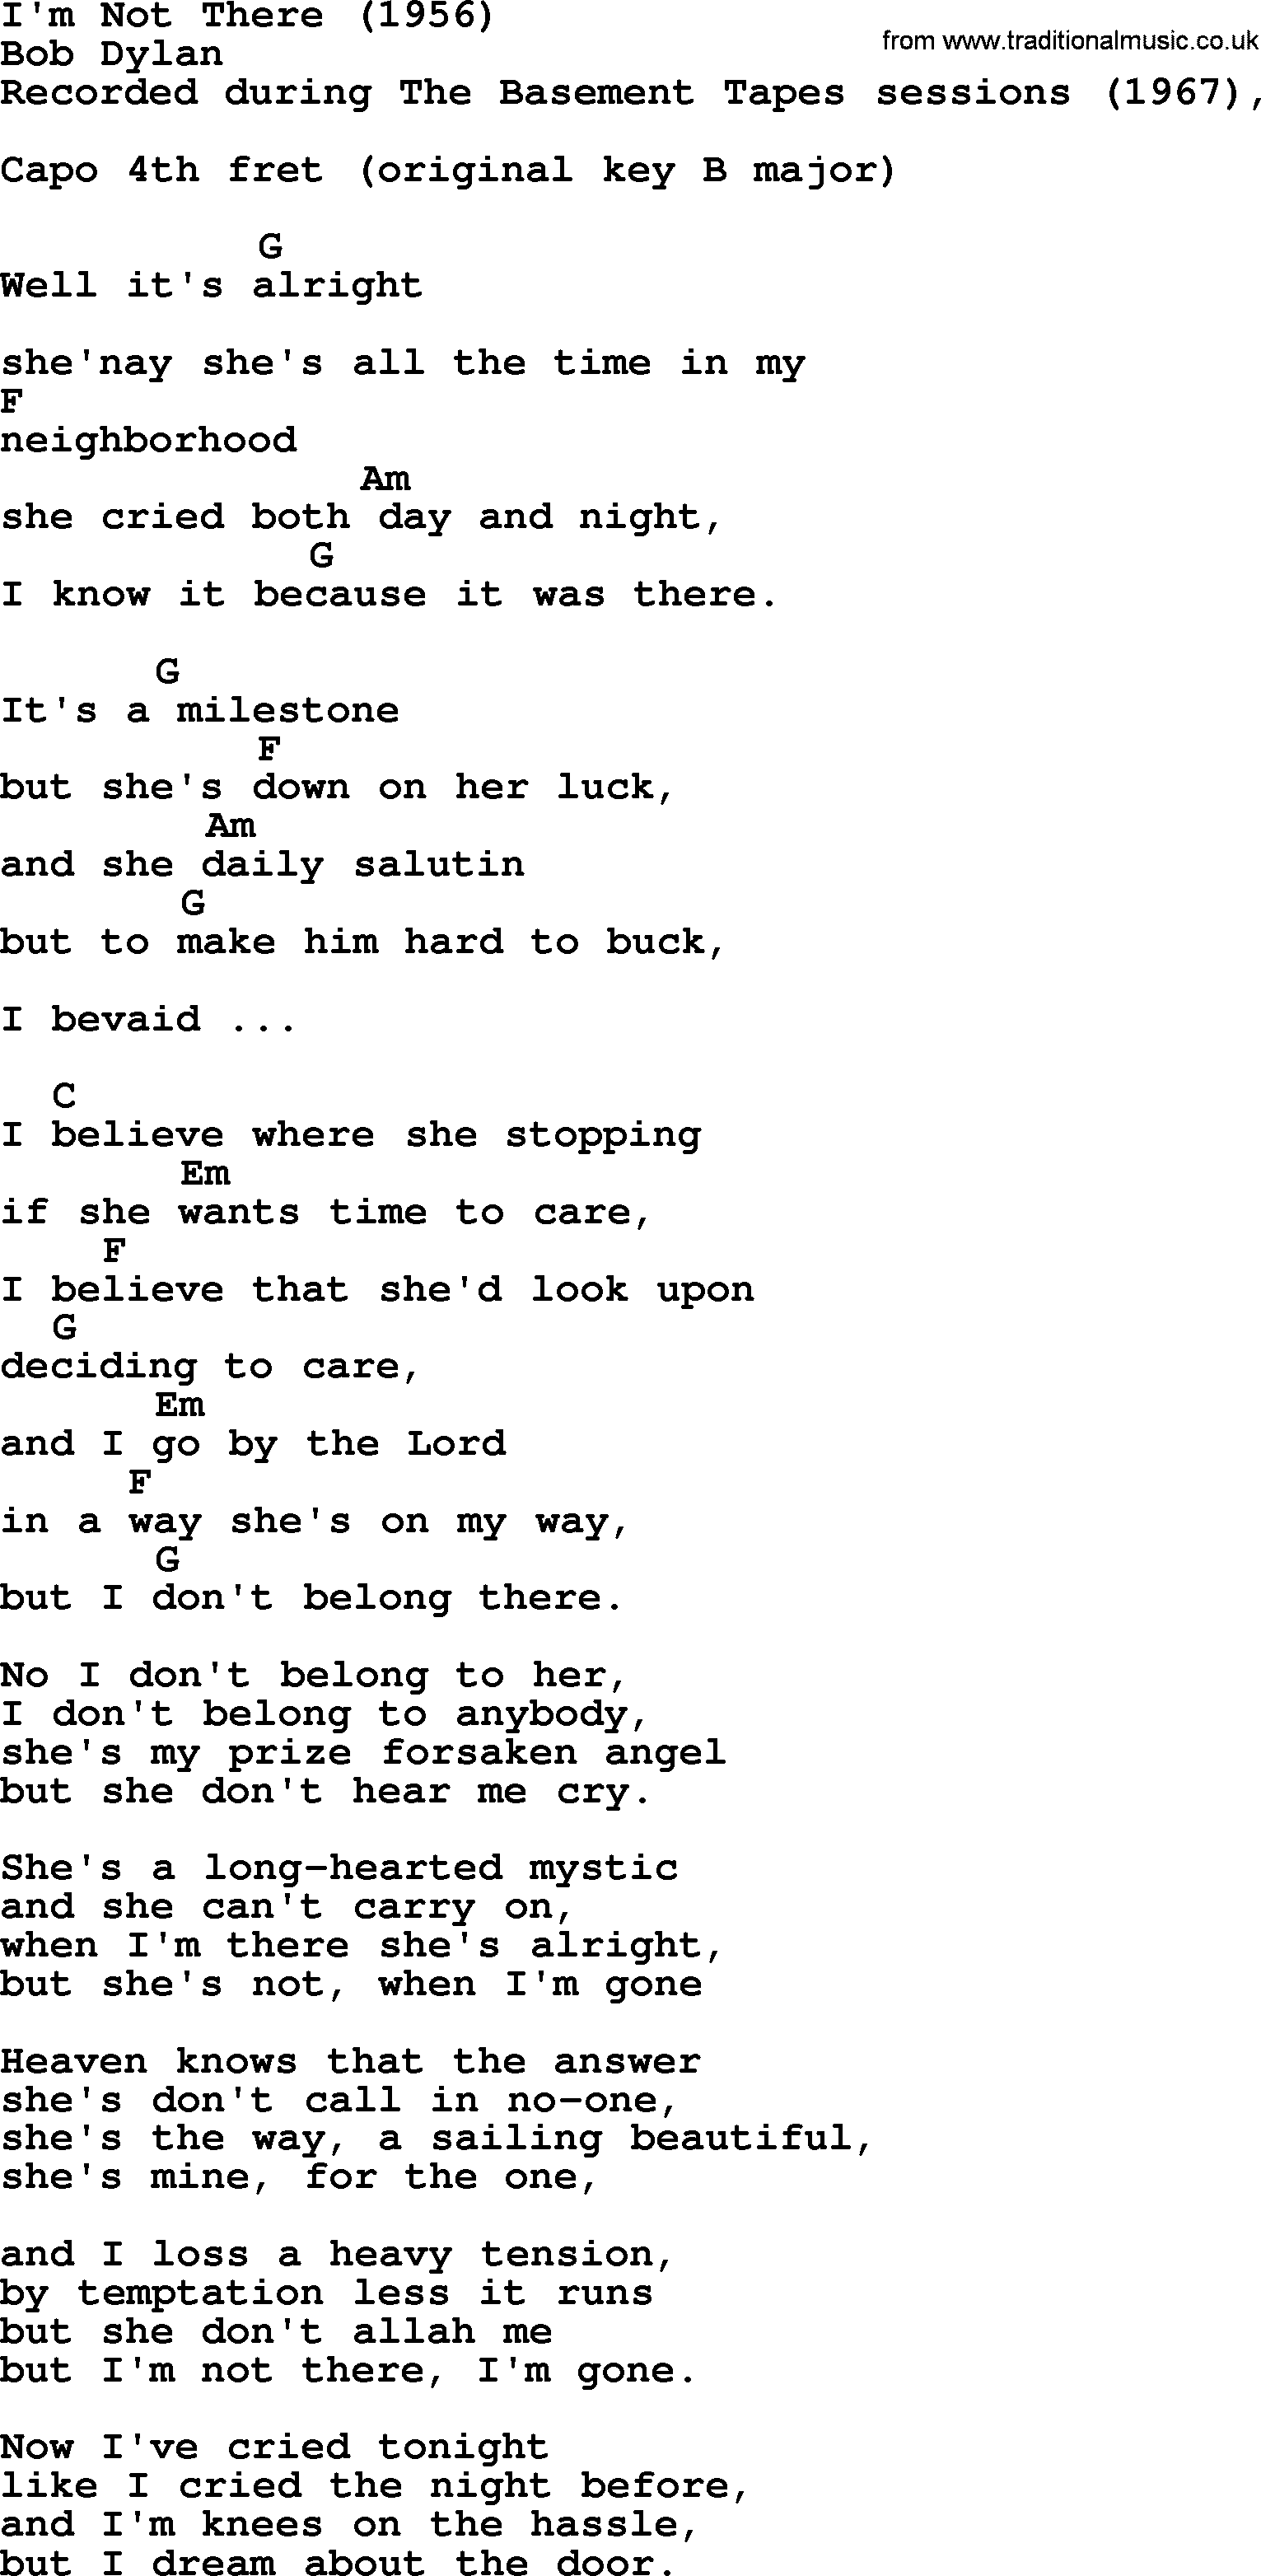 Bob Dylan song, lyrics with chords - I'm Not There (1956)